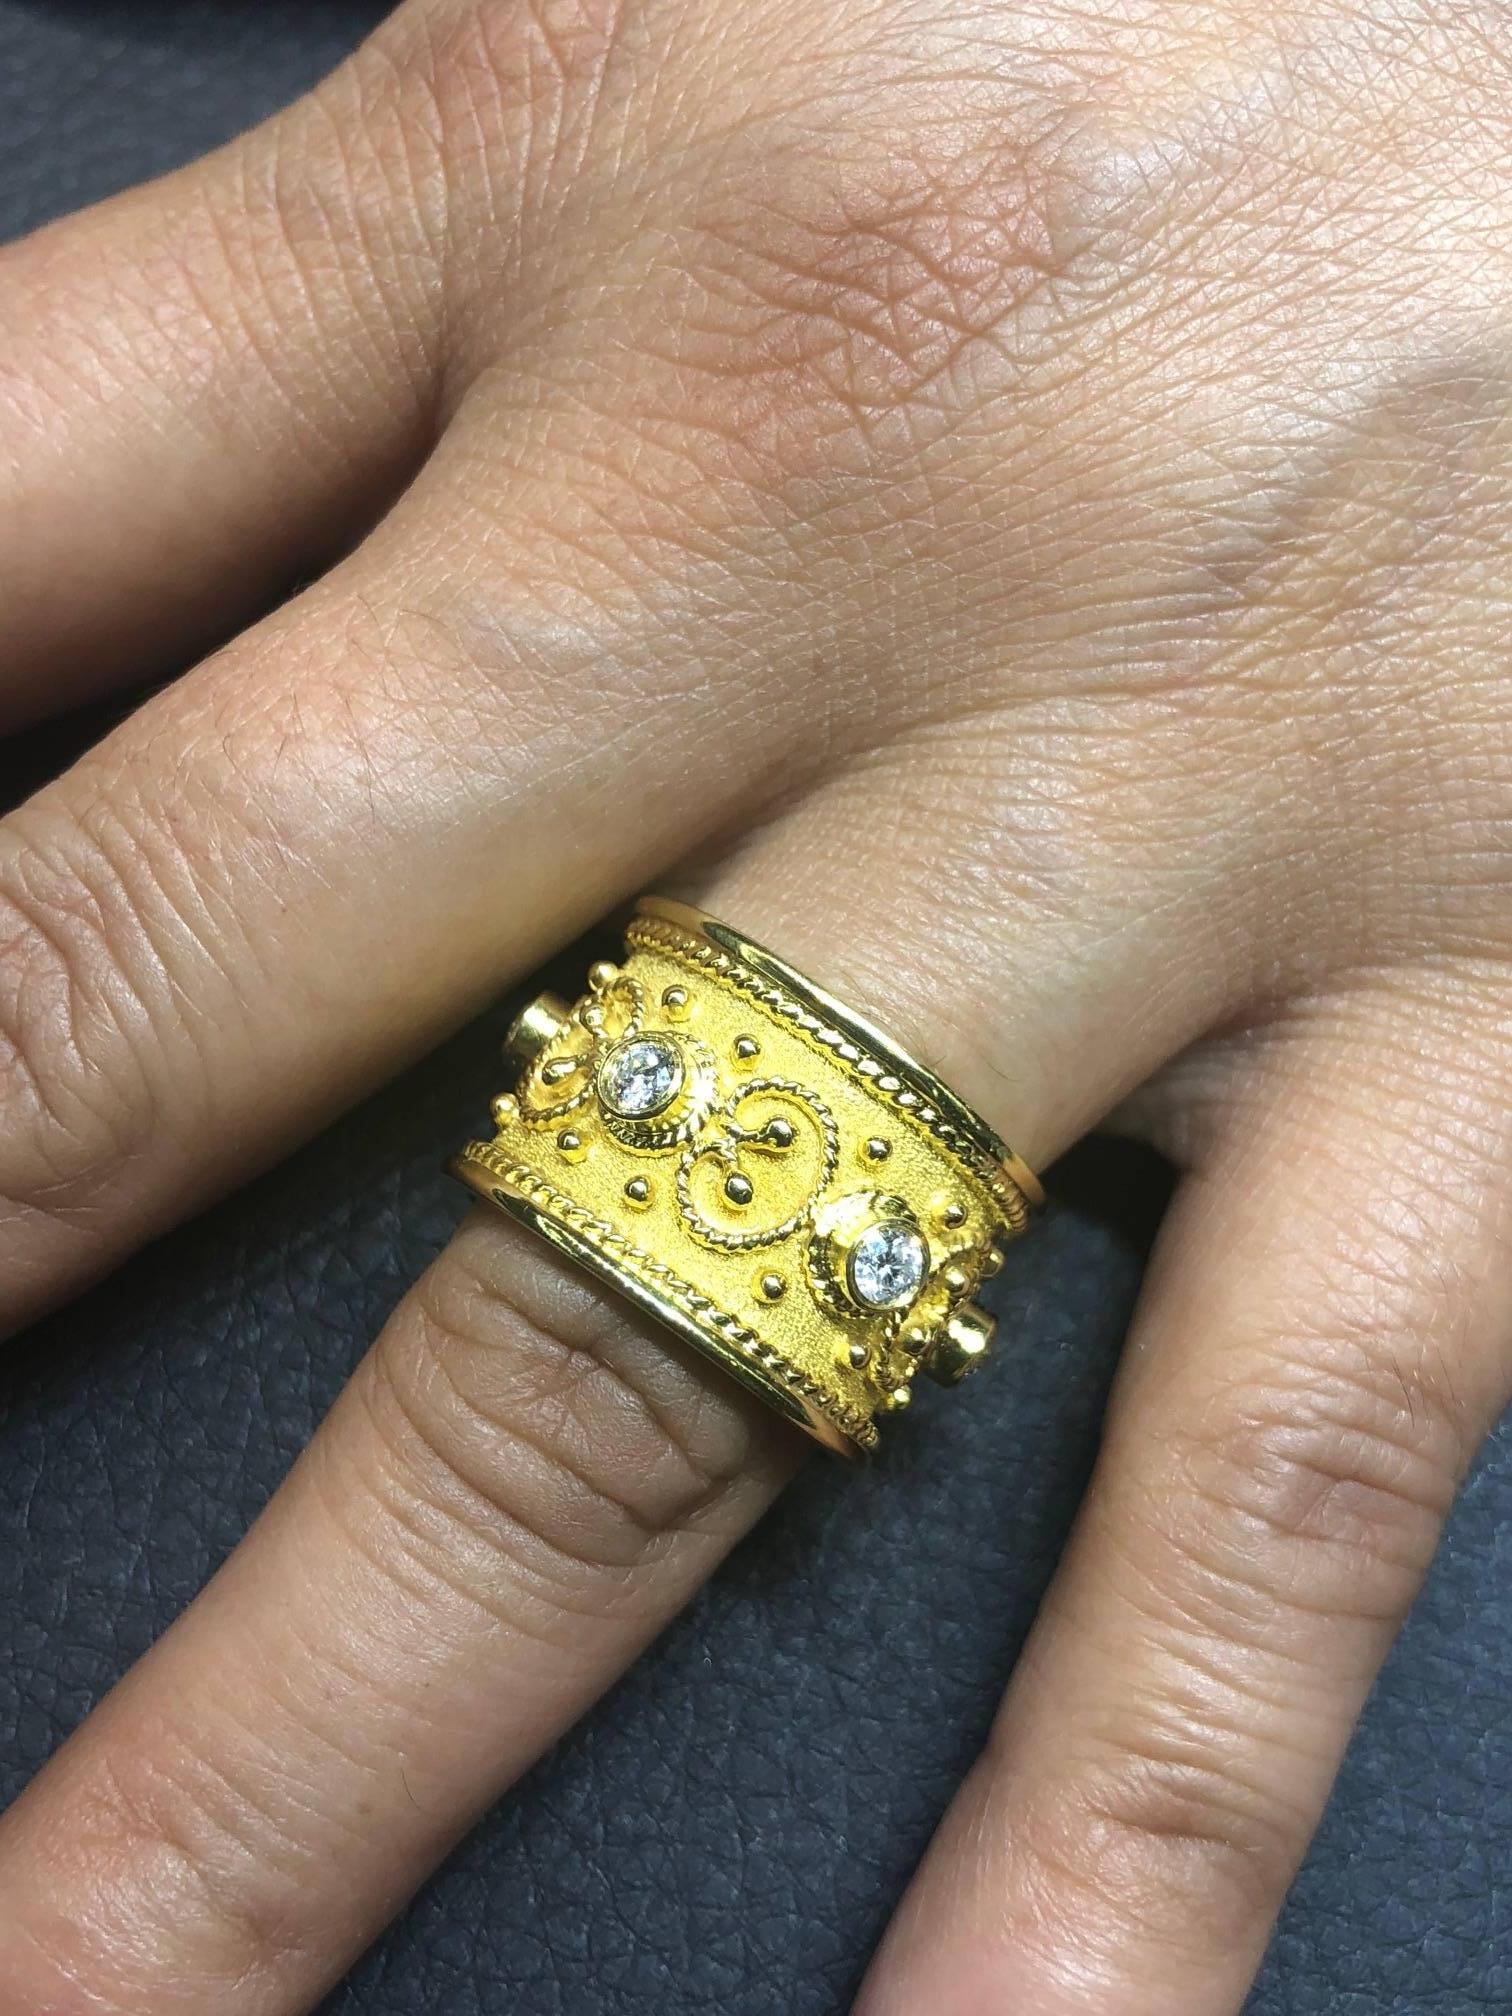 S.Georgios design ring is handmade from solid 18 Karat Yellow Gold and is microscopically decorated all the way around with gold beads and wires shaped like the last letter of Greek Alphabet - Omega, which symbolizes eternal life. Granulated details